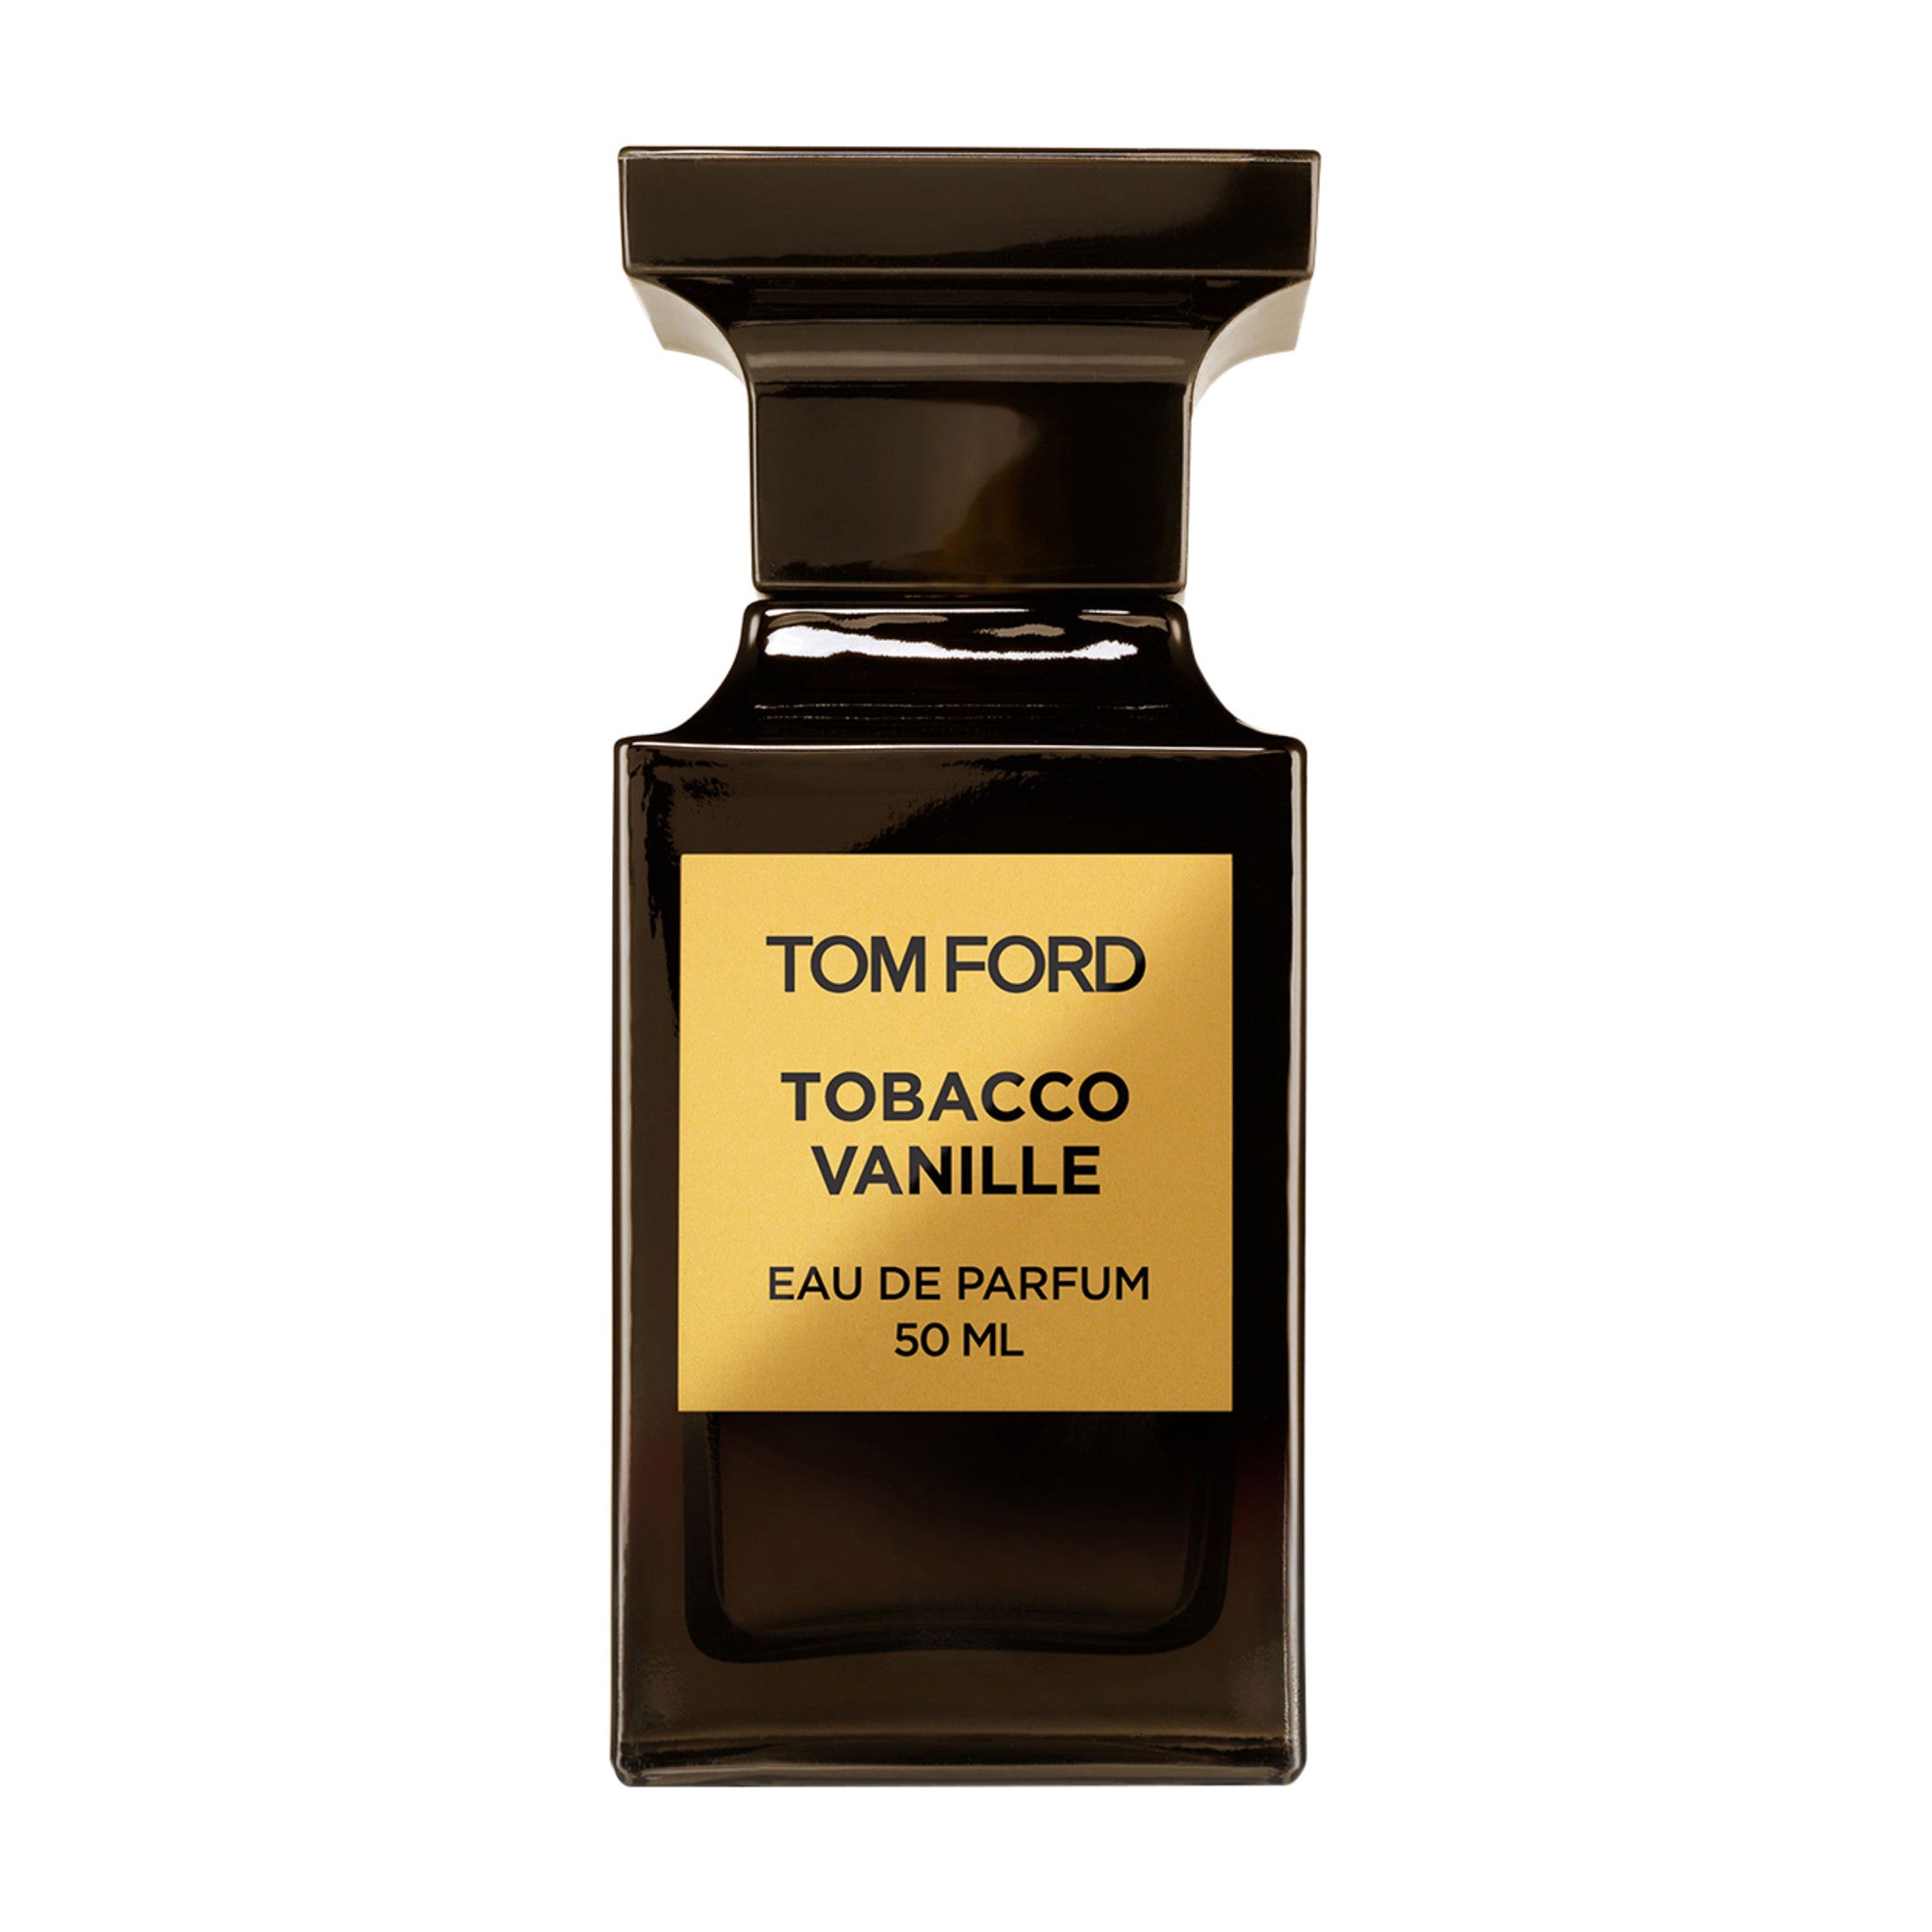 Share Your Love for Luxury with Tom Ford Fragrances